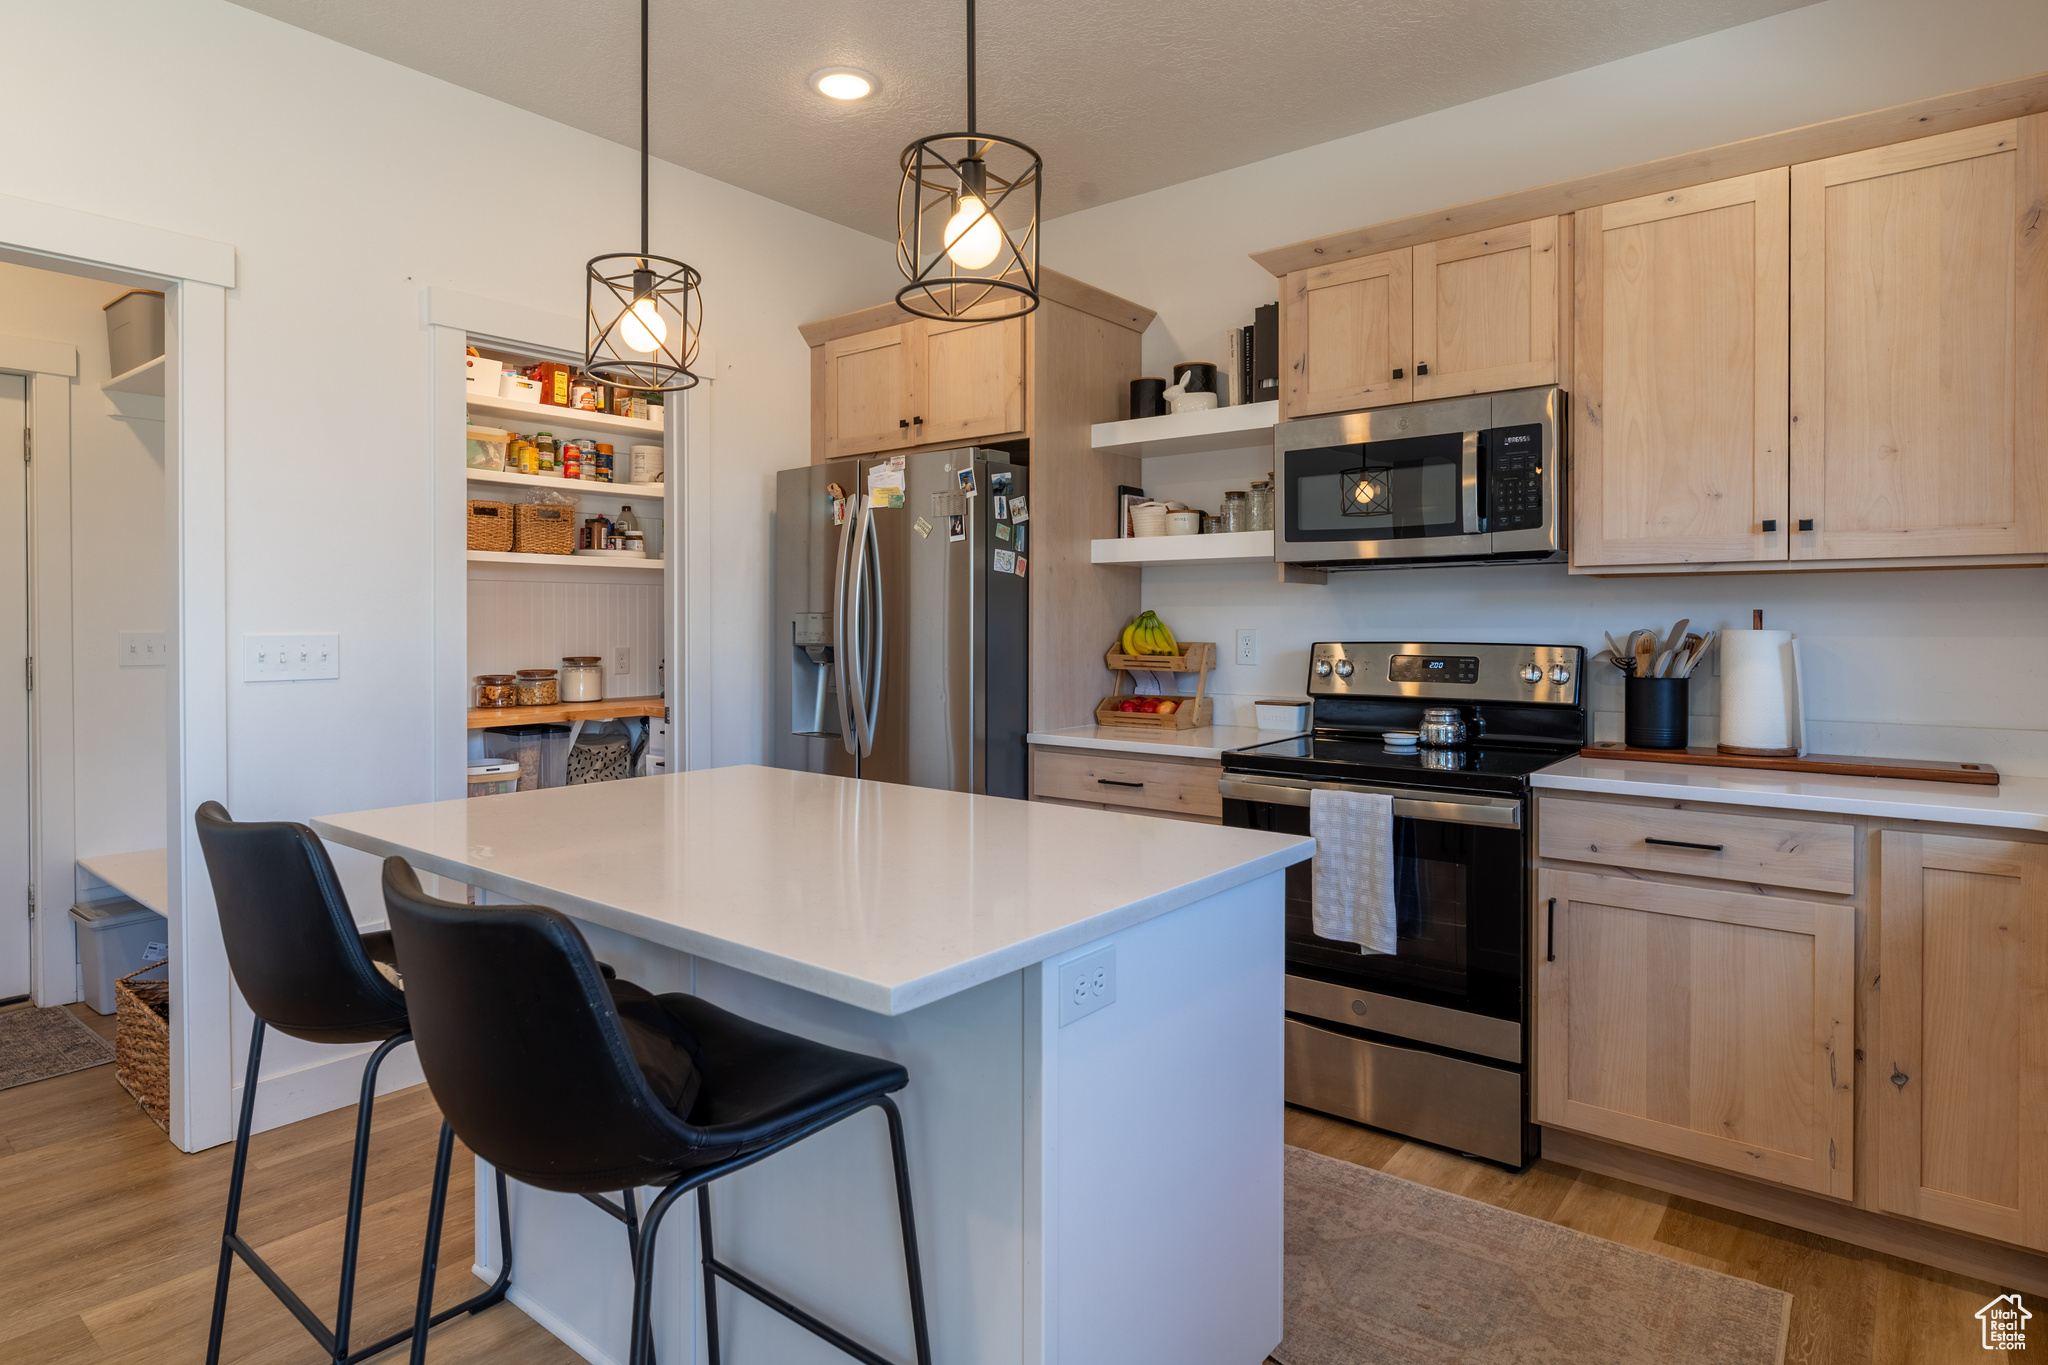 Kitchen featuring a kitchen breakfast bar, pendant lighting, appliances with stainless steel finishes, light hardwood / wood-style flooring, and light brown cabinetry